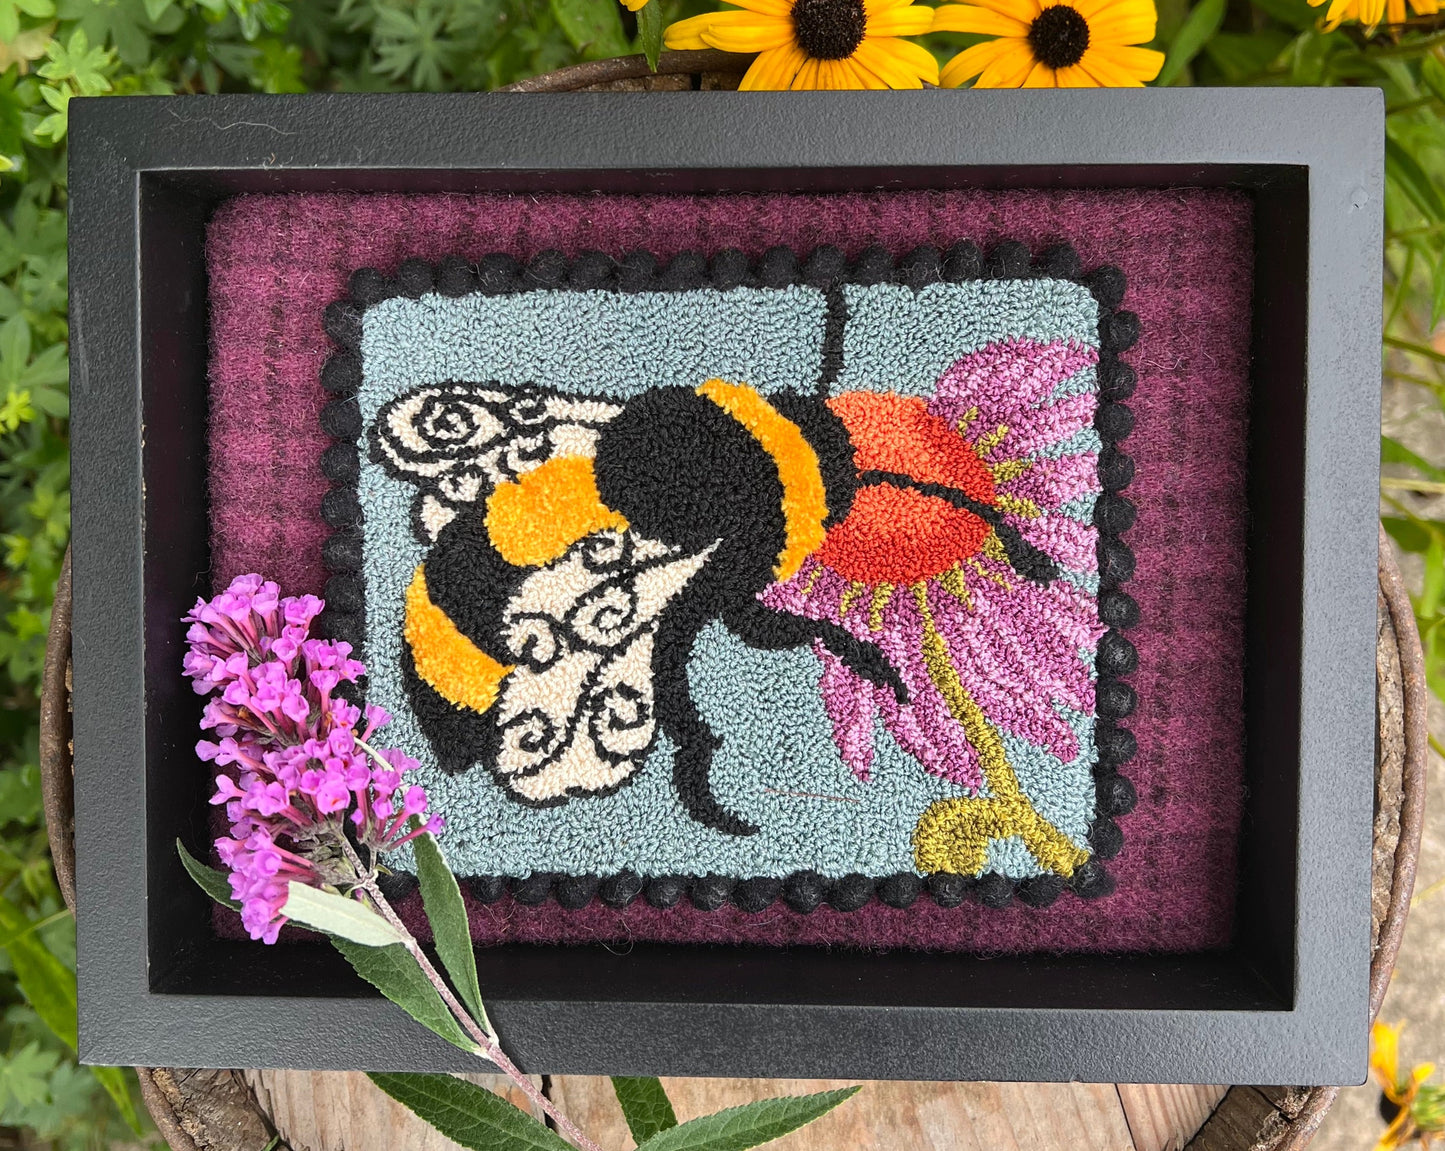 A Bee's Kiss PDF 4-page digital downloadable Needle Punch Pattern by Orphaned Wool, copyright 2023 Kelly Kanyok. This is the perfect pattern for anyone that wants to learn to use a Needle Punch. A sweet little pattern with vibrant colors and easy to follow instructions.